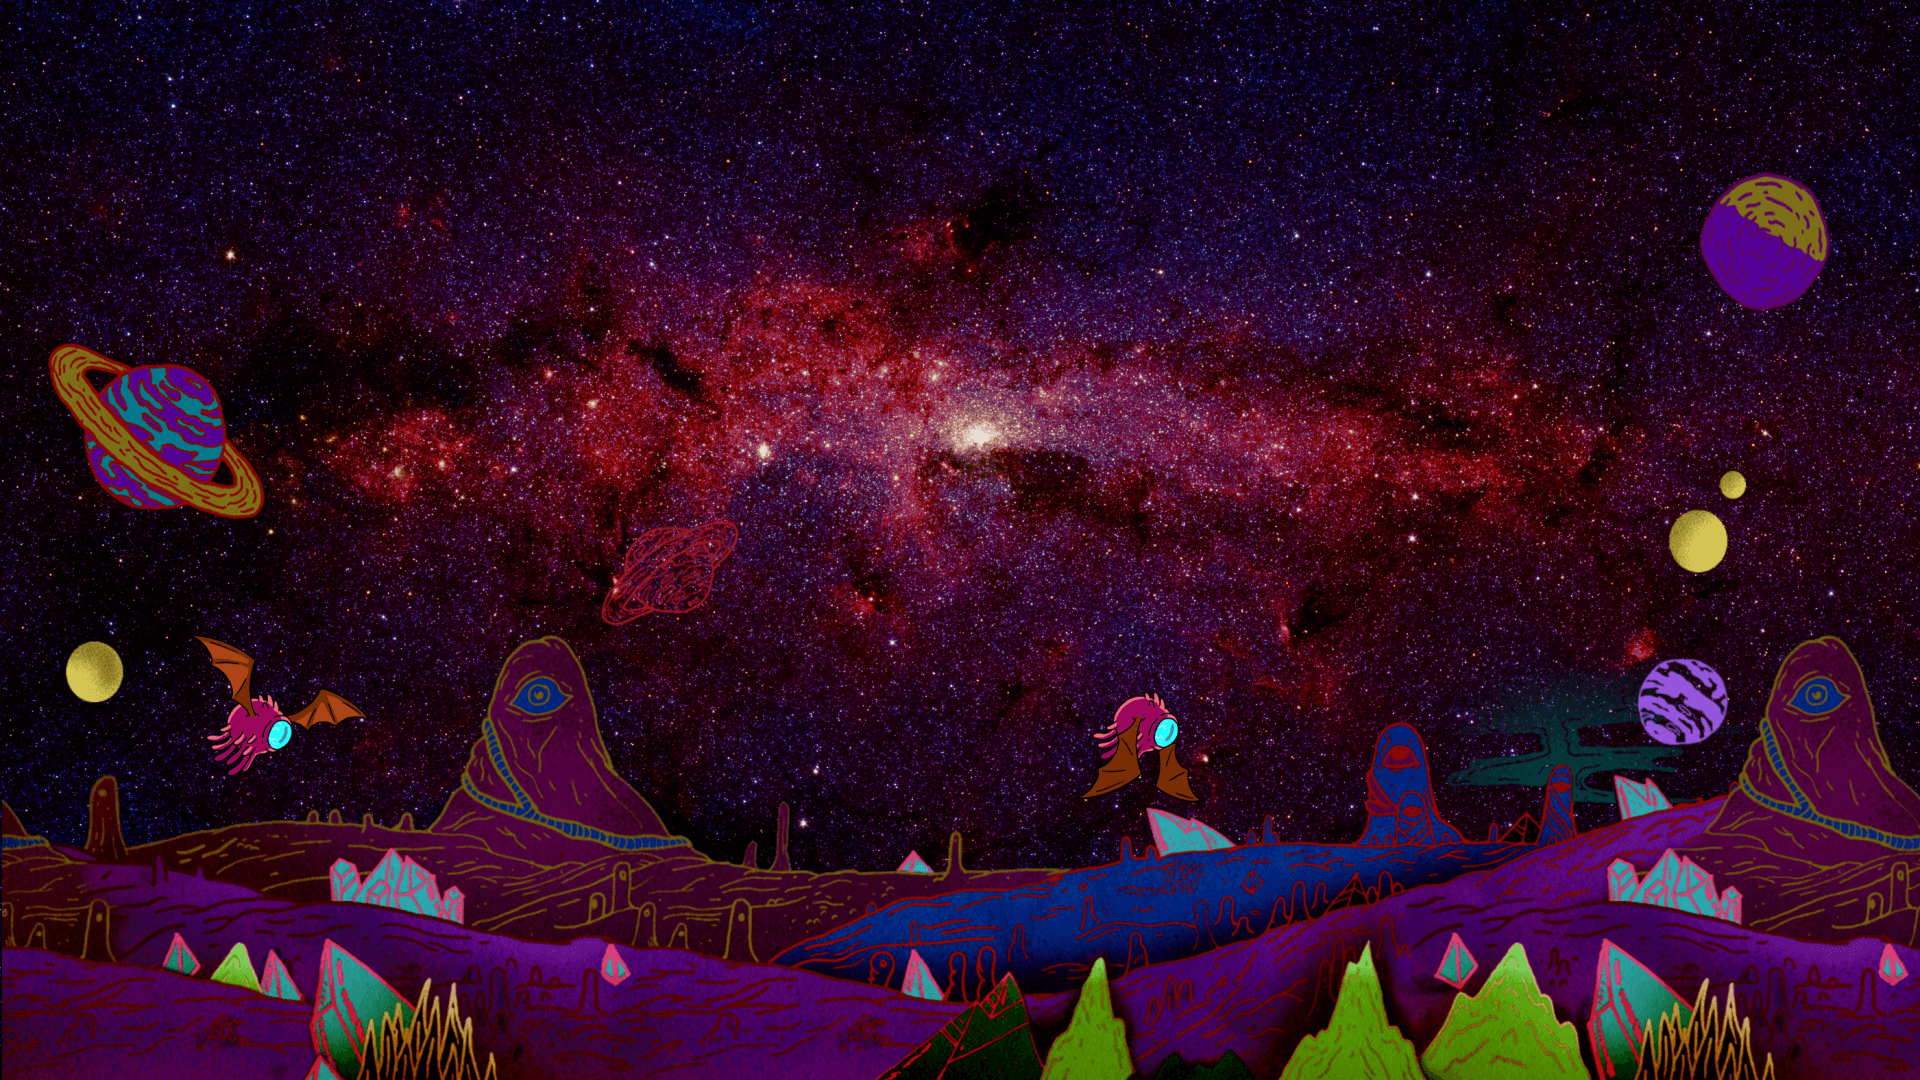 rick and morty wallpaper,space,adventure game,screenshot,night,animation